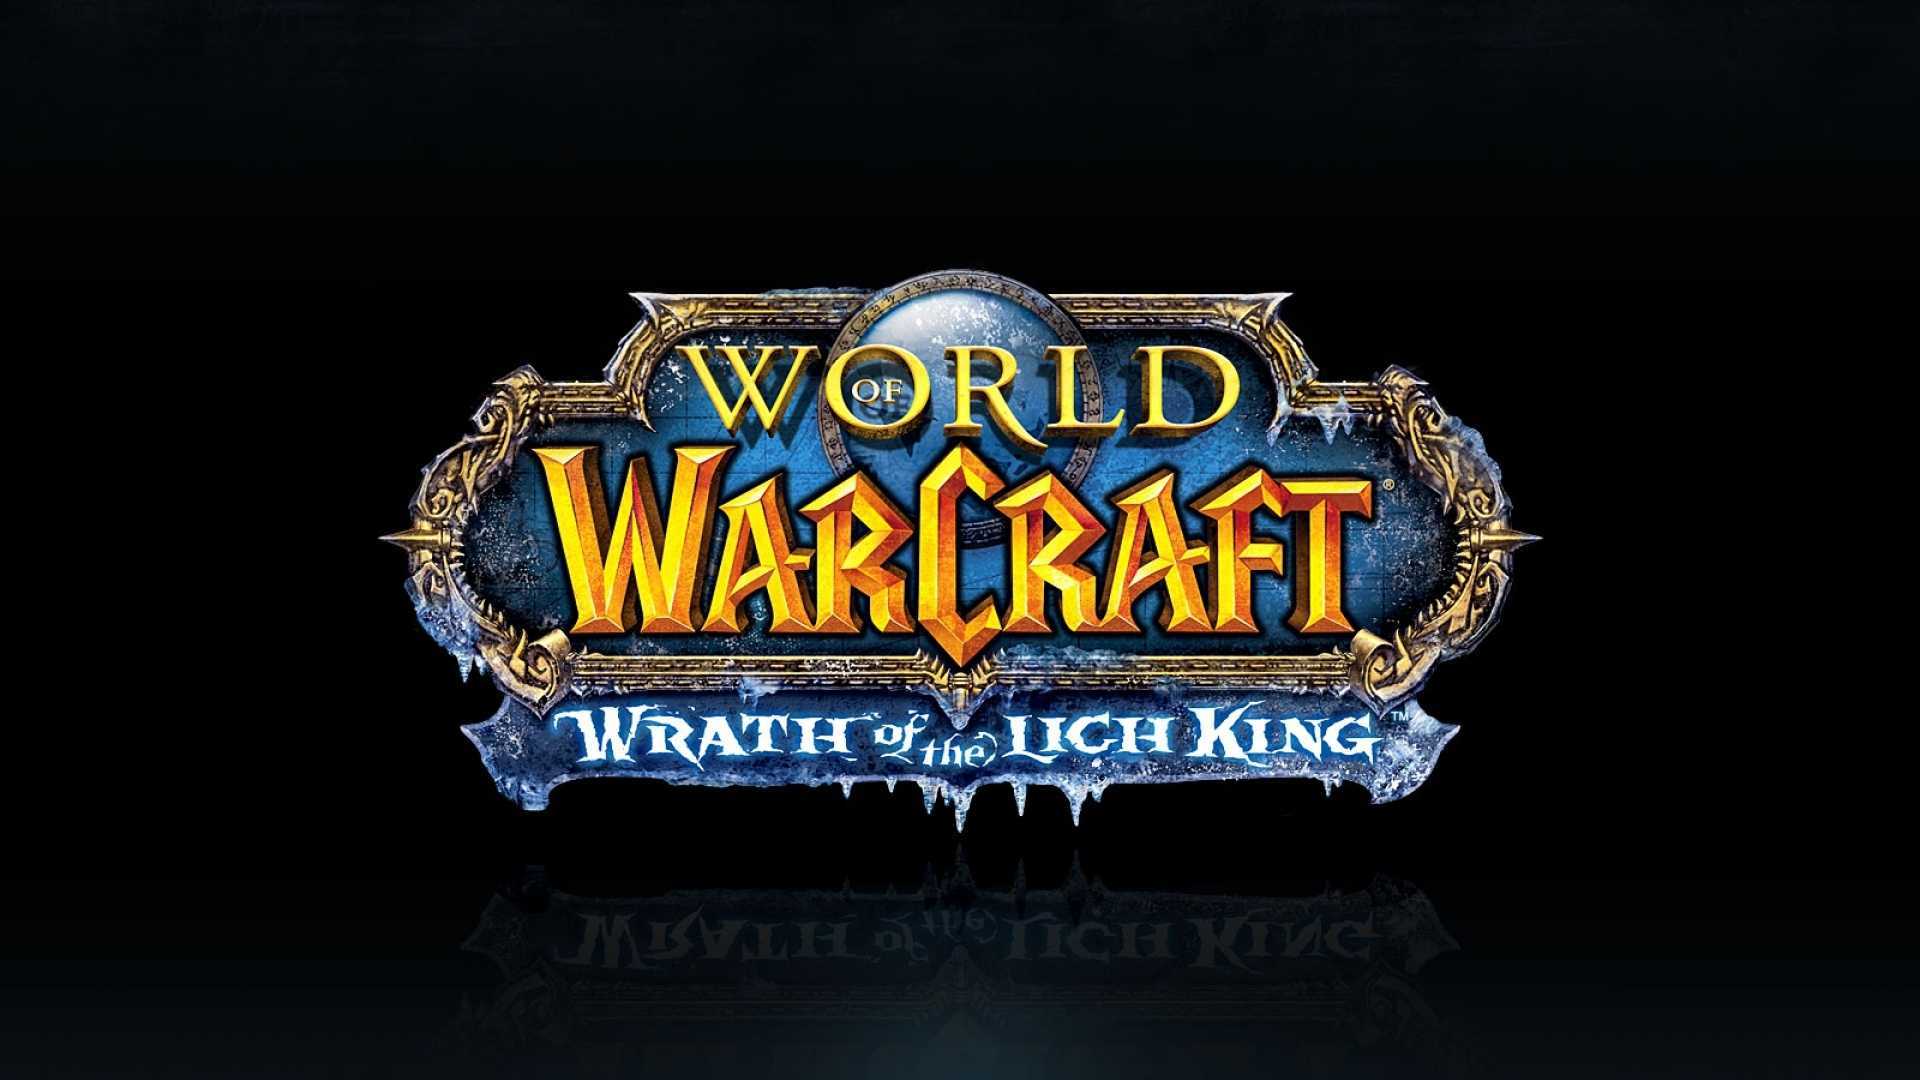 Wotlk classic mining leveling guide 1-450 - wow-professions